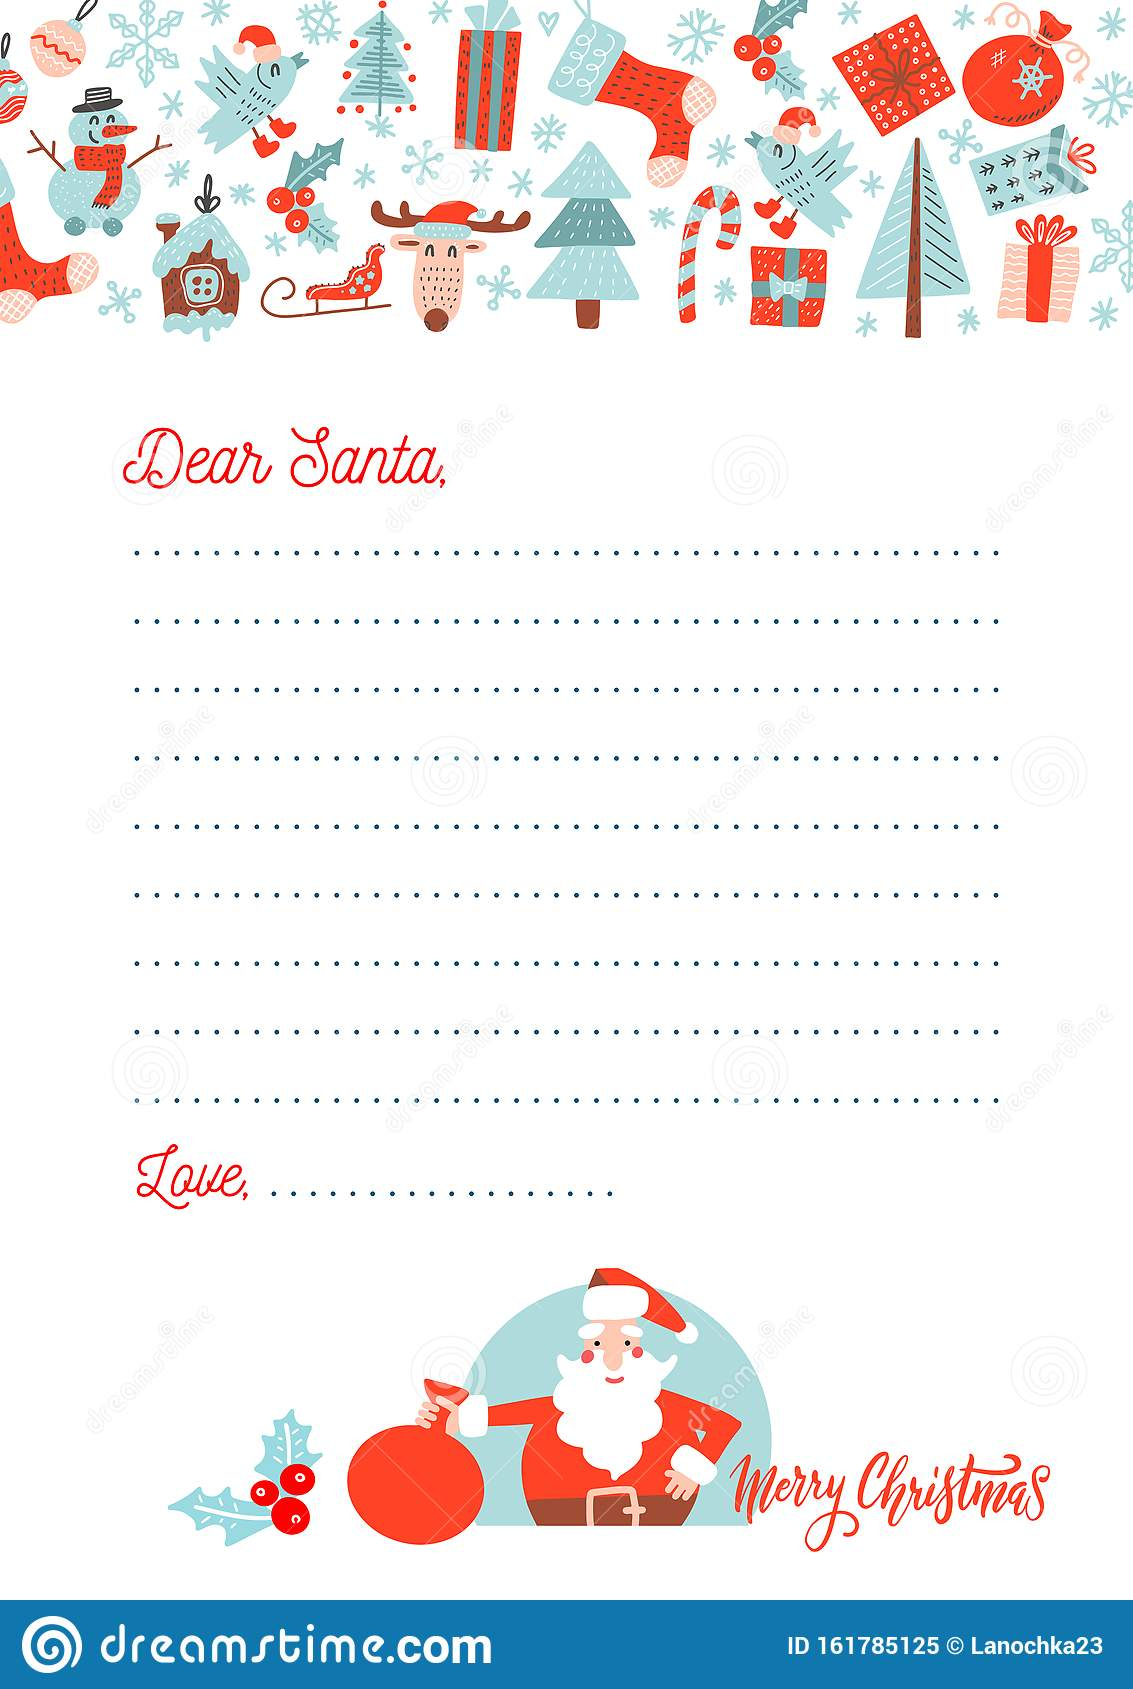 A4 Christmas Letter To Santa Claus Template Decorated 